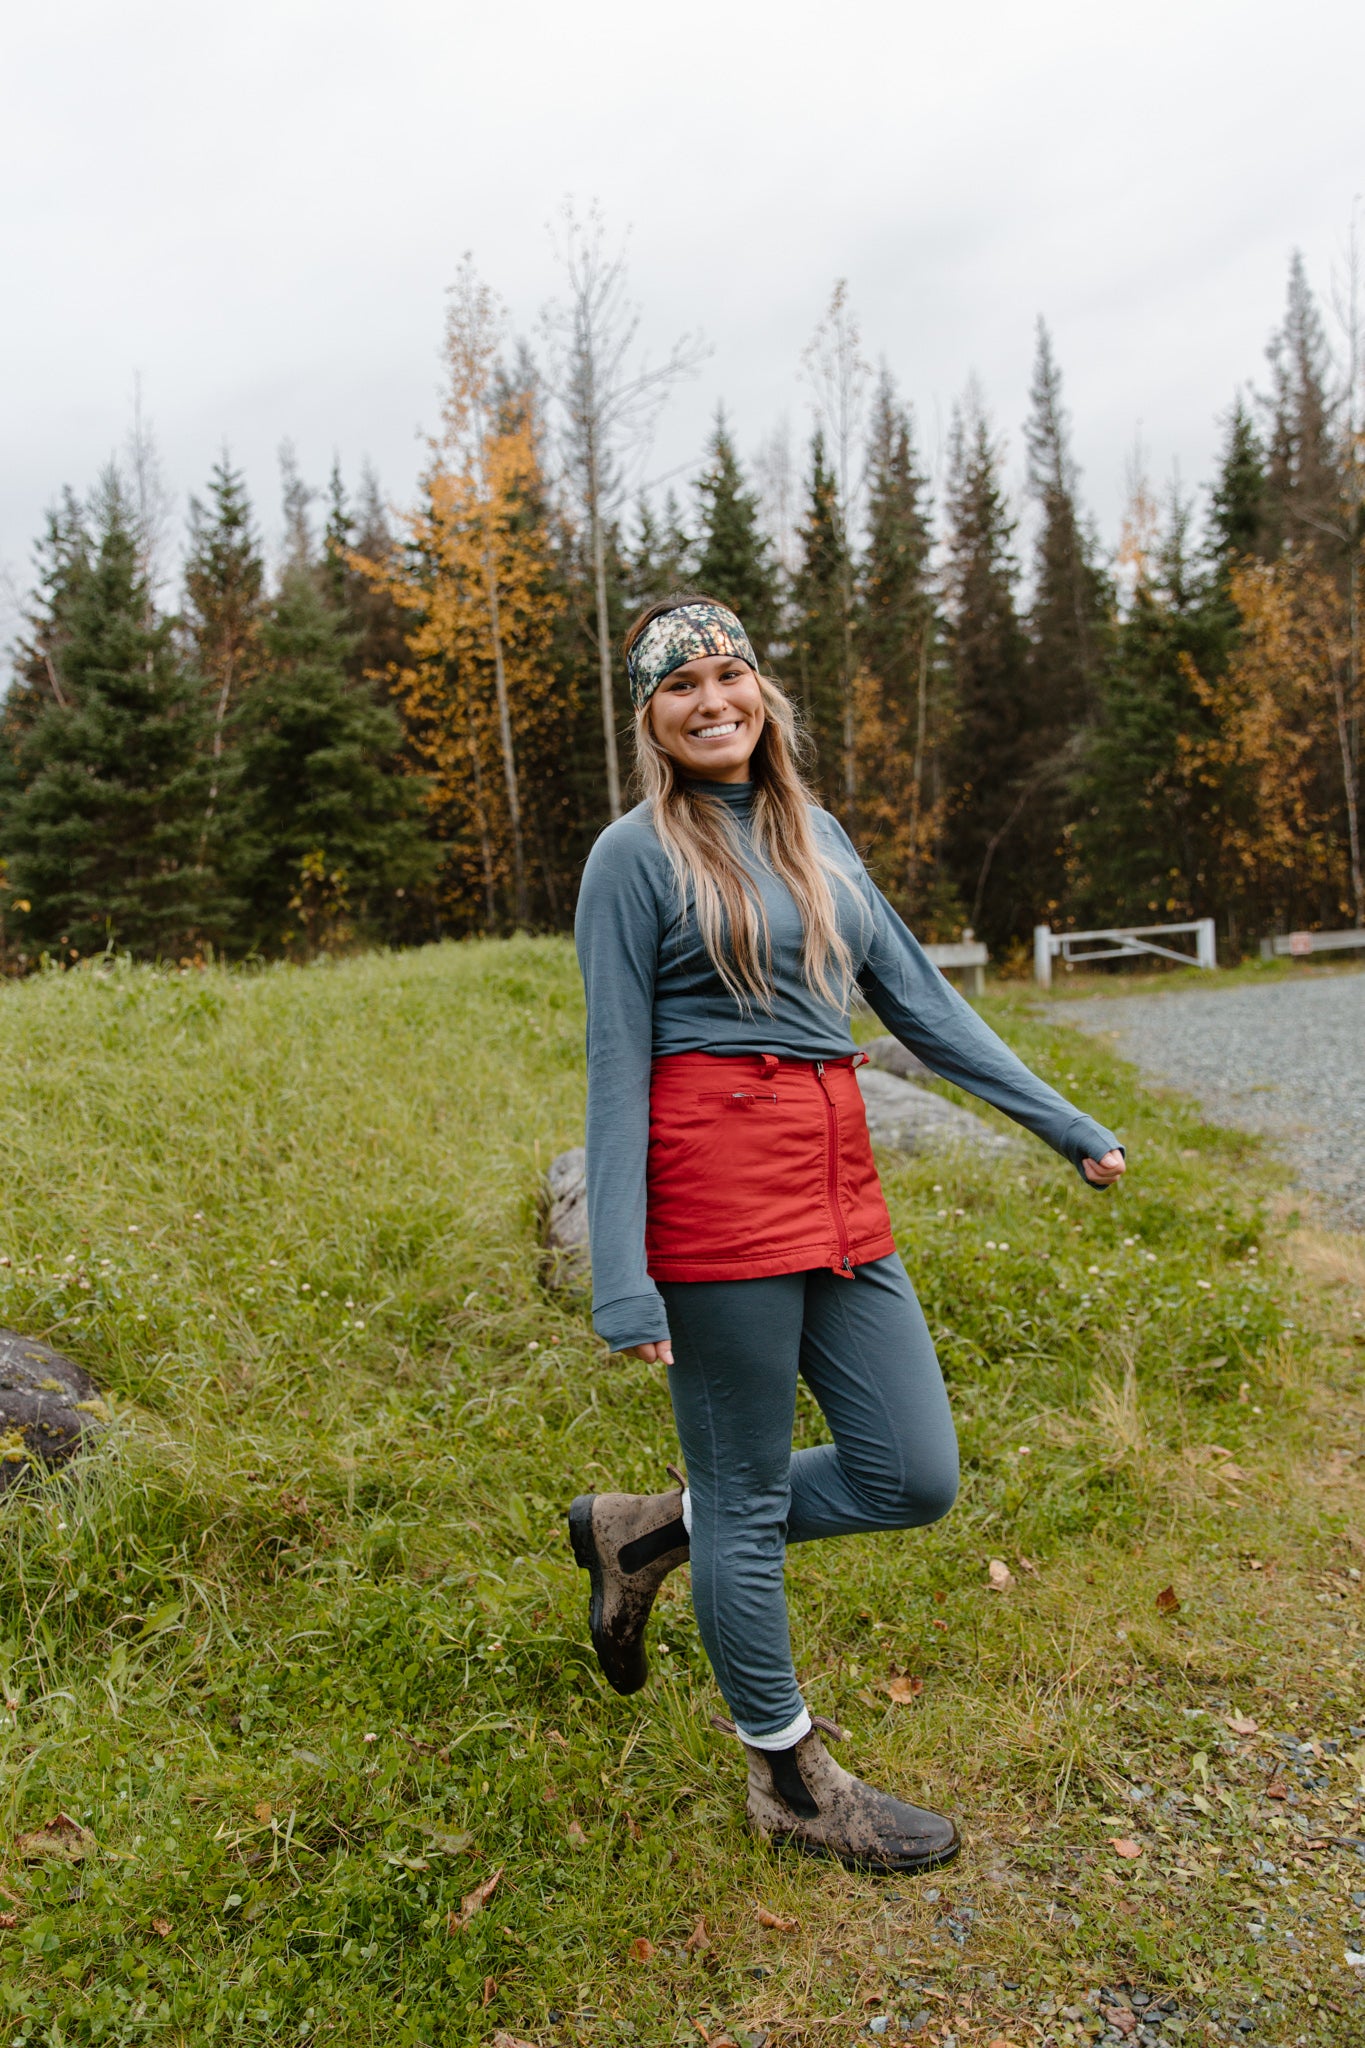 alpine fit merino wool base layer top and bottom on model outside with cute headband